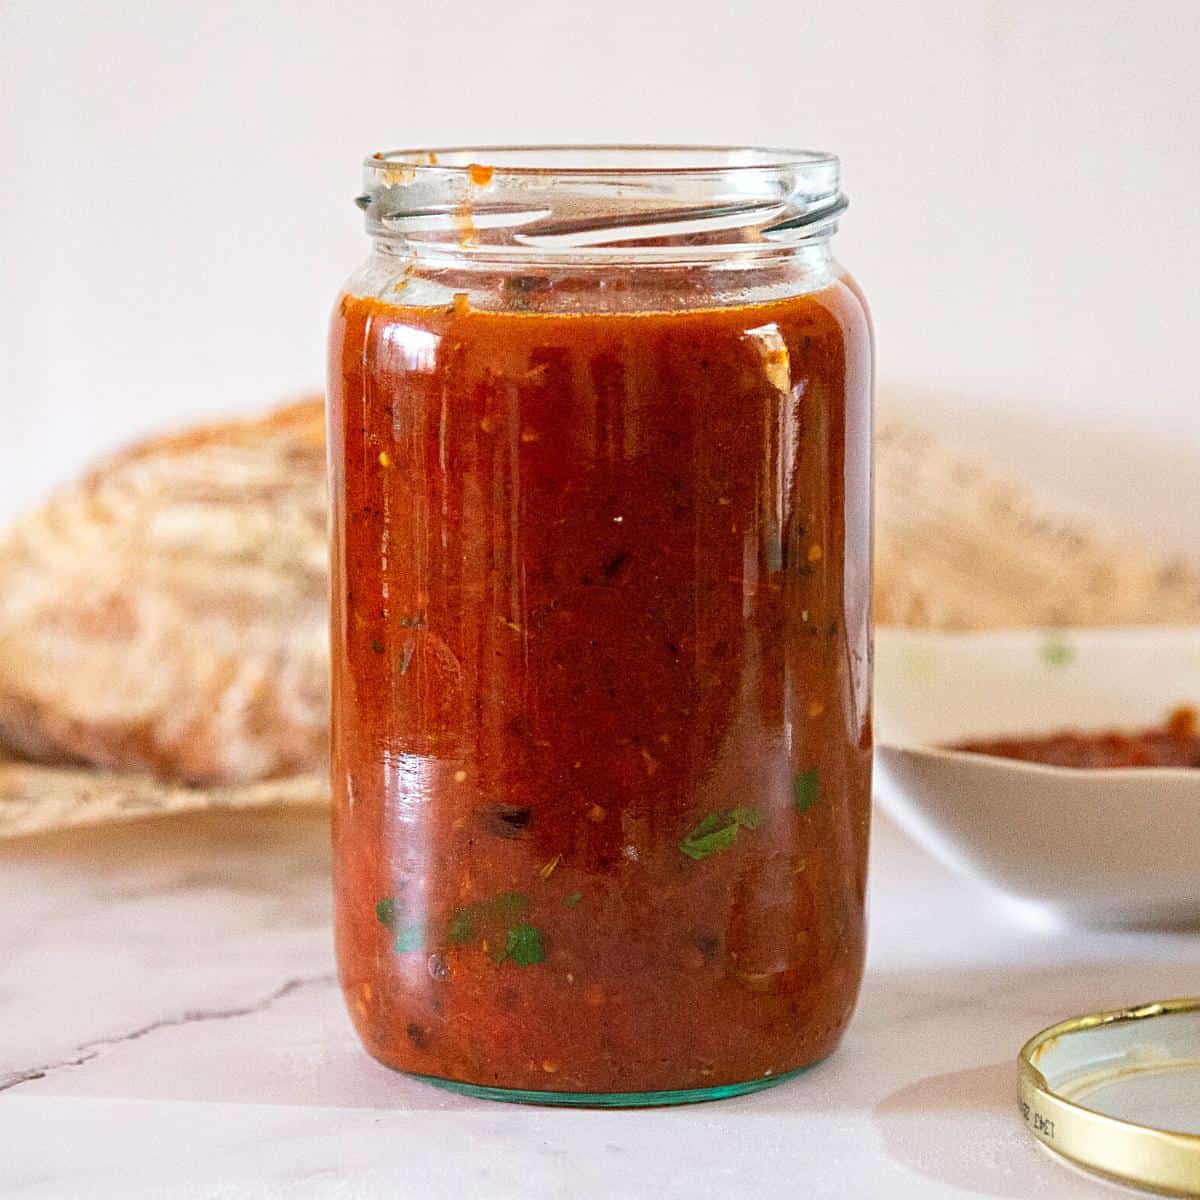 A jar with tomato sauce.